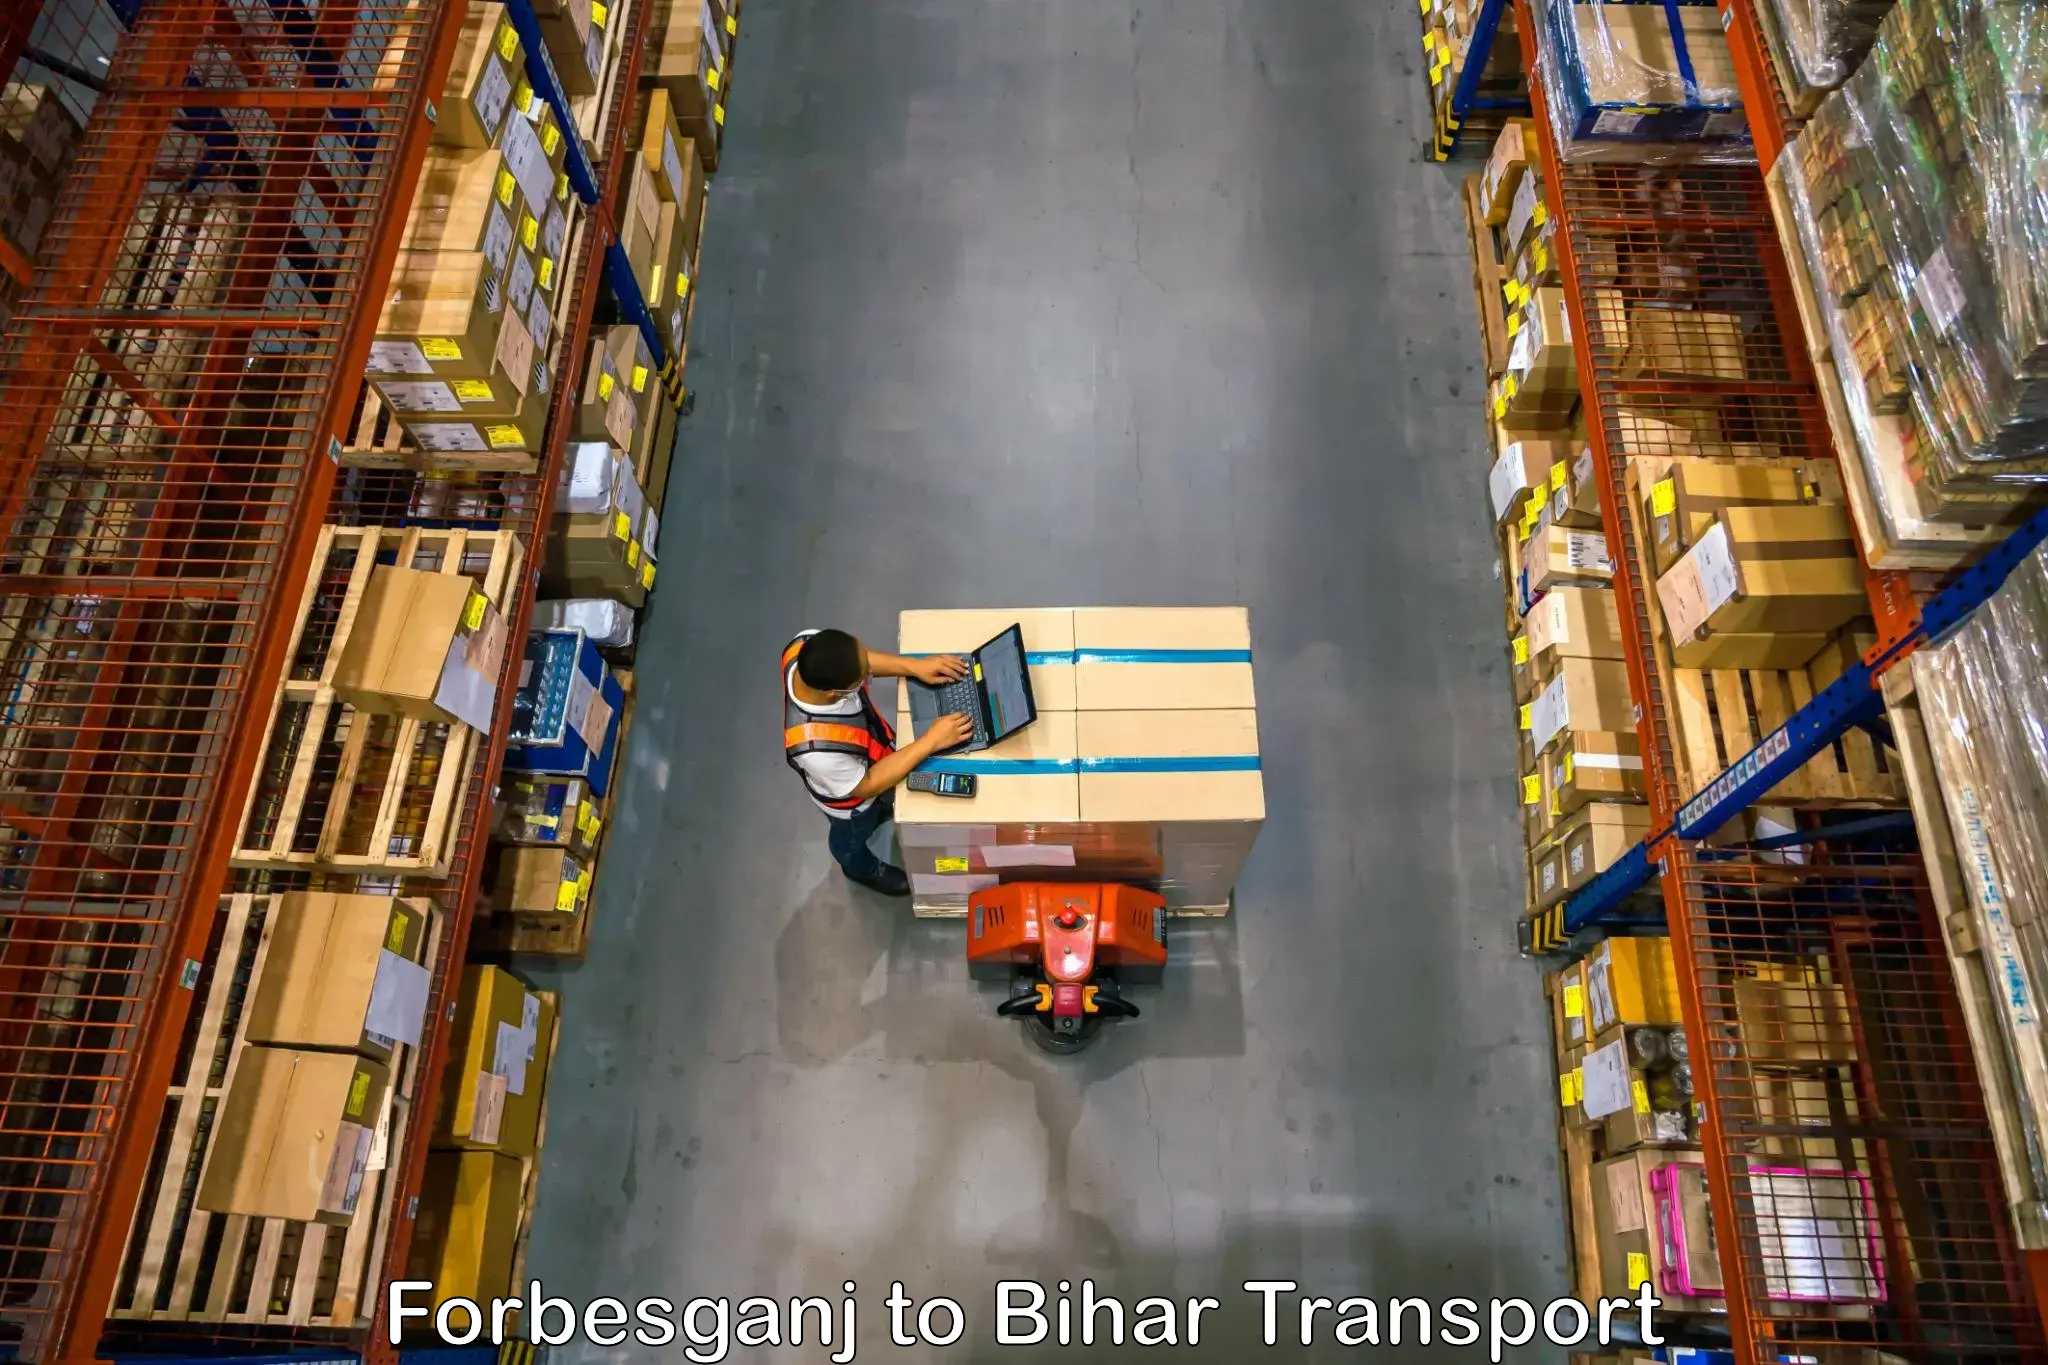 Truck transport companies in India Forbesganj to Fatwah